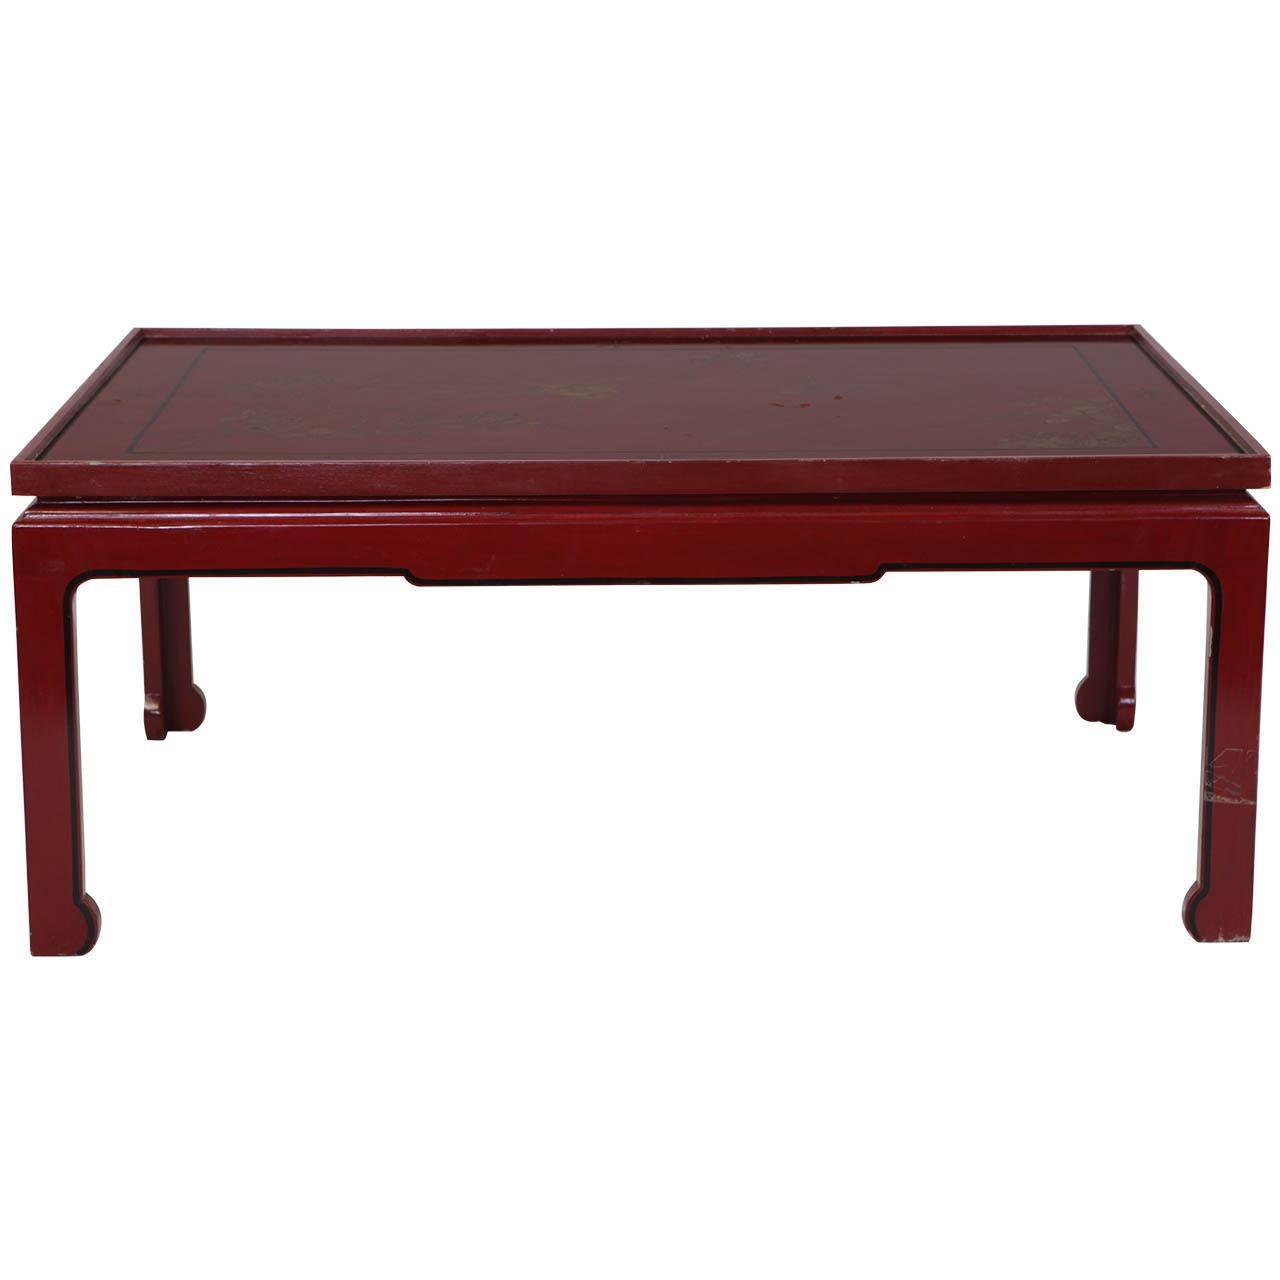 A square red lacquered coffee table with a 19th century Chinese decorated screen on four legs of the 20th century.
Measures: cm 108 x 70 x 45.